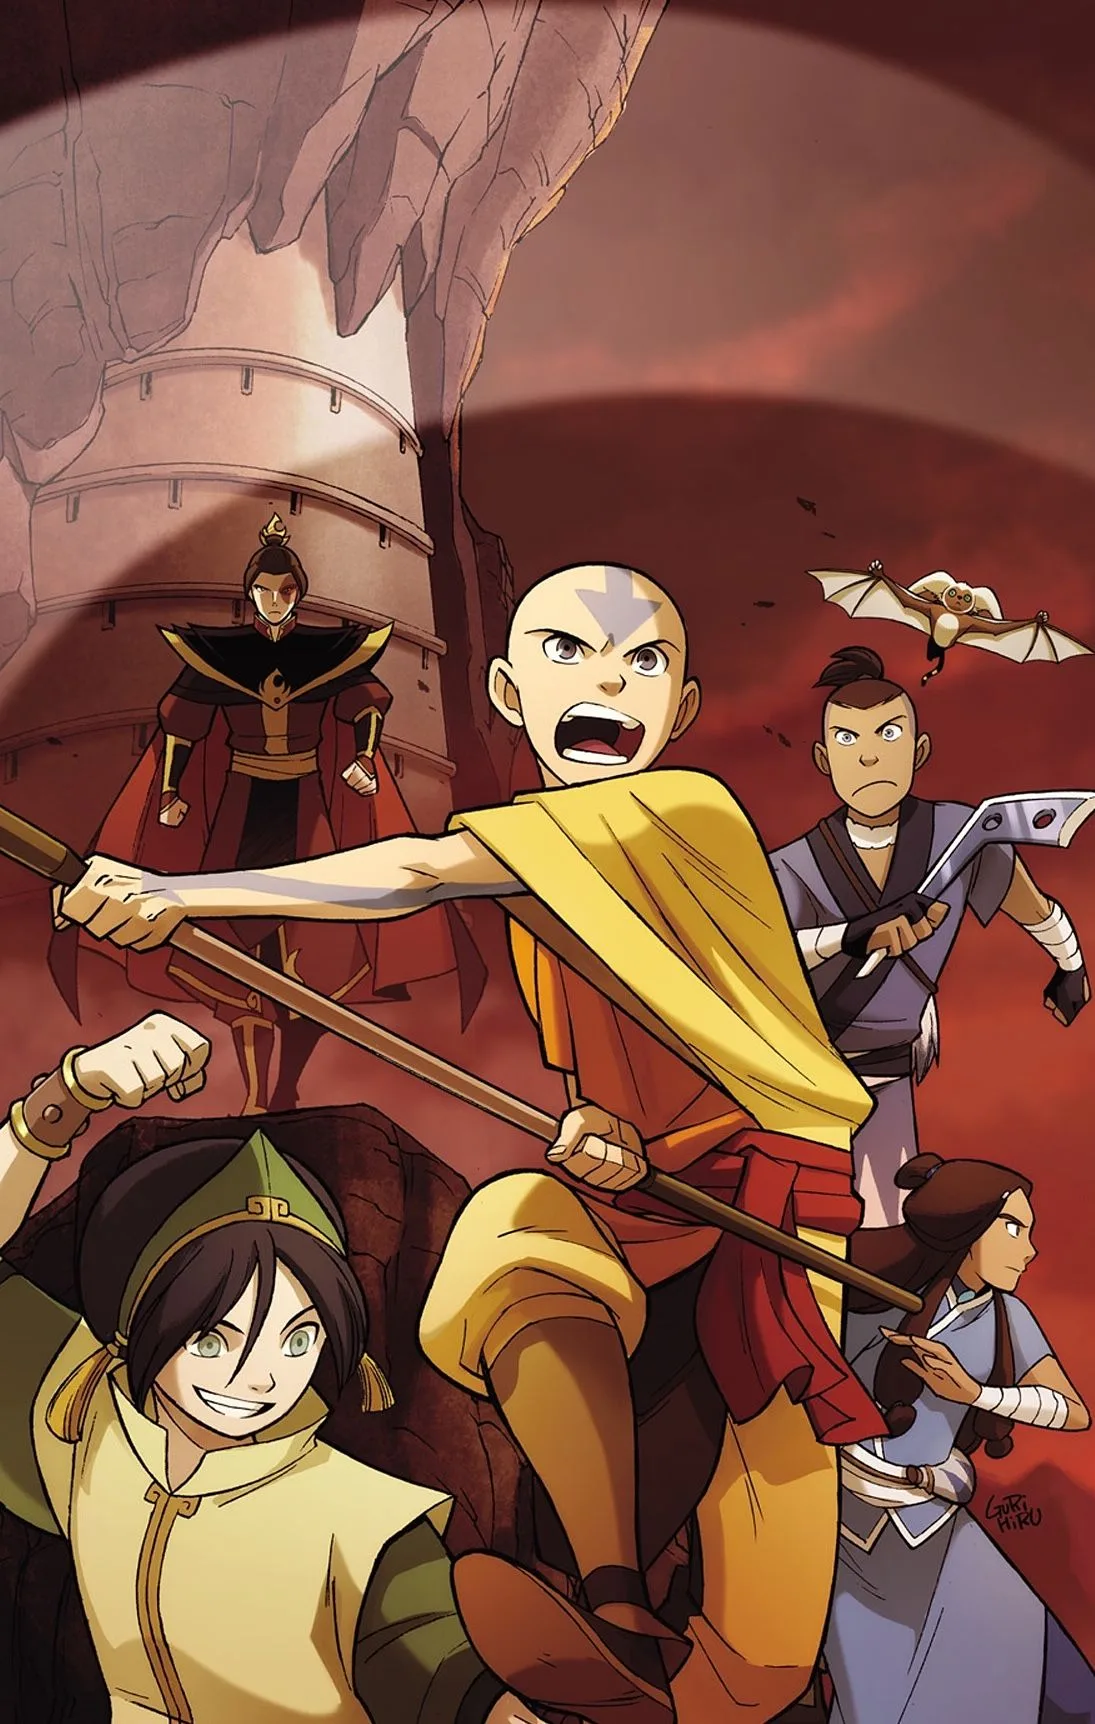 Image depicting characters from Netflix's live-action adaptation of Avatar: The Last Airbender.